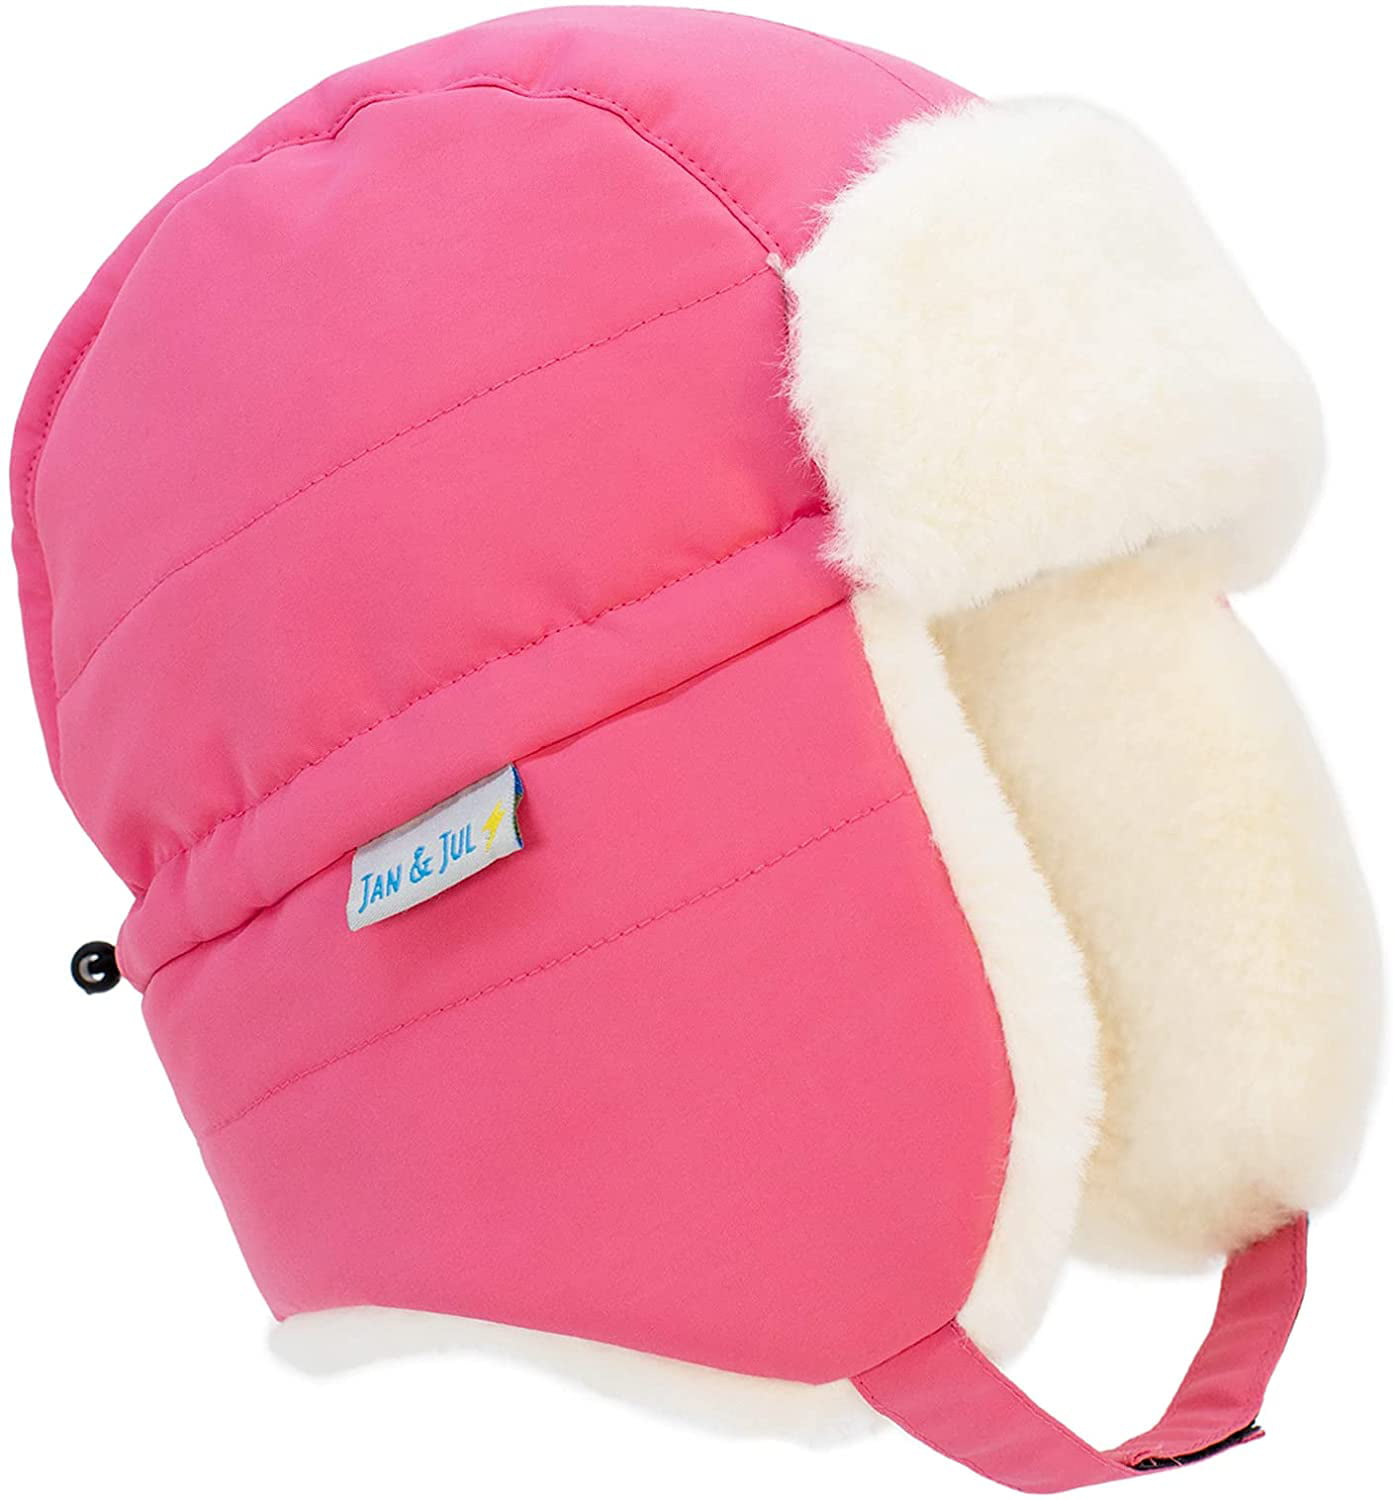 GRO-with-Me Adjustable Winter Hat for Baby Toddler Jan & Jul Cozy-Dry Trapper Hat